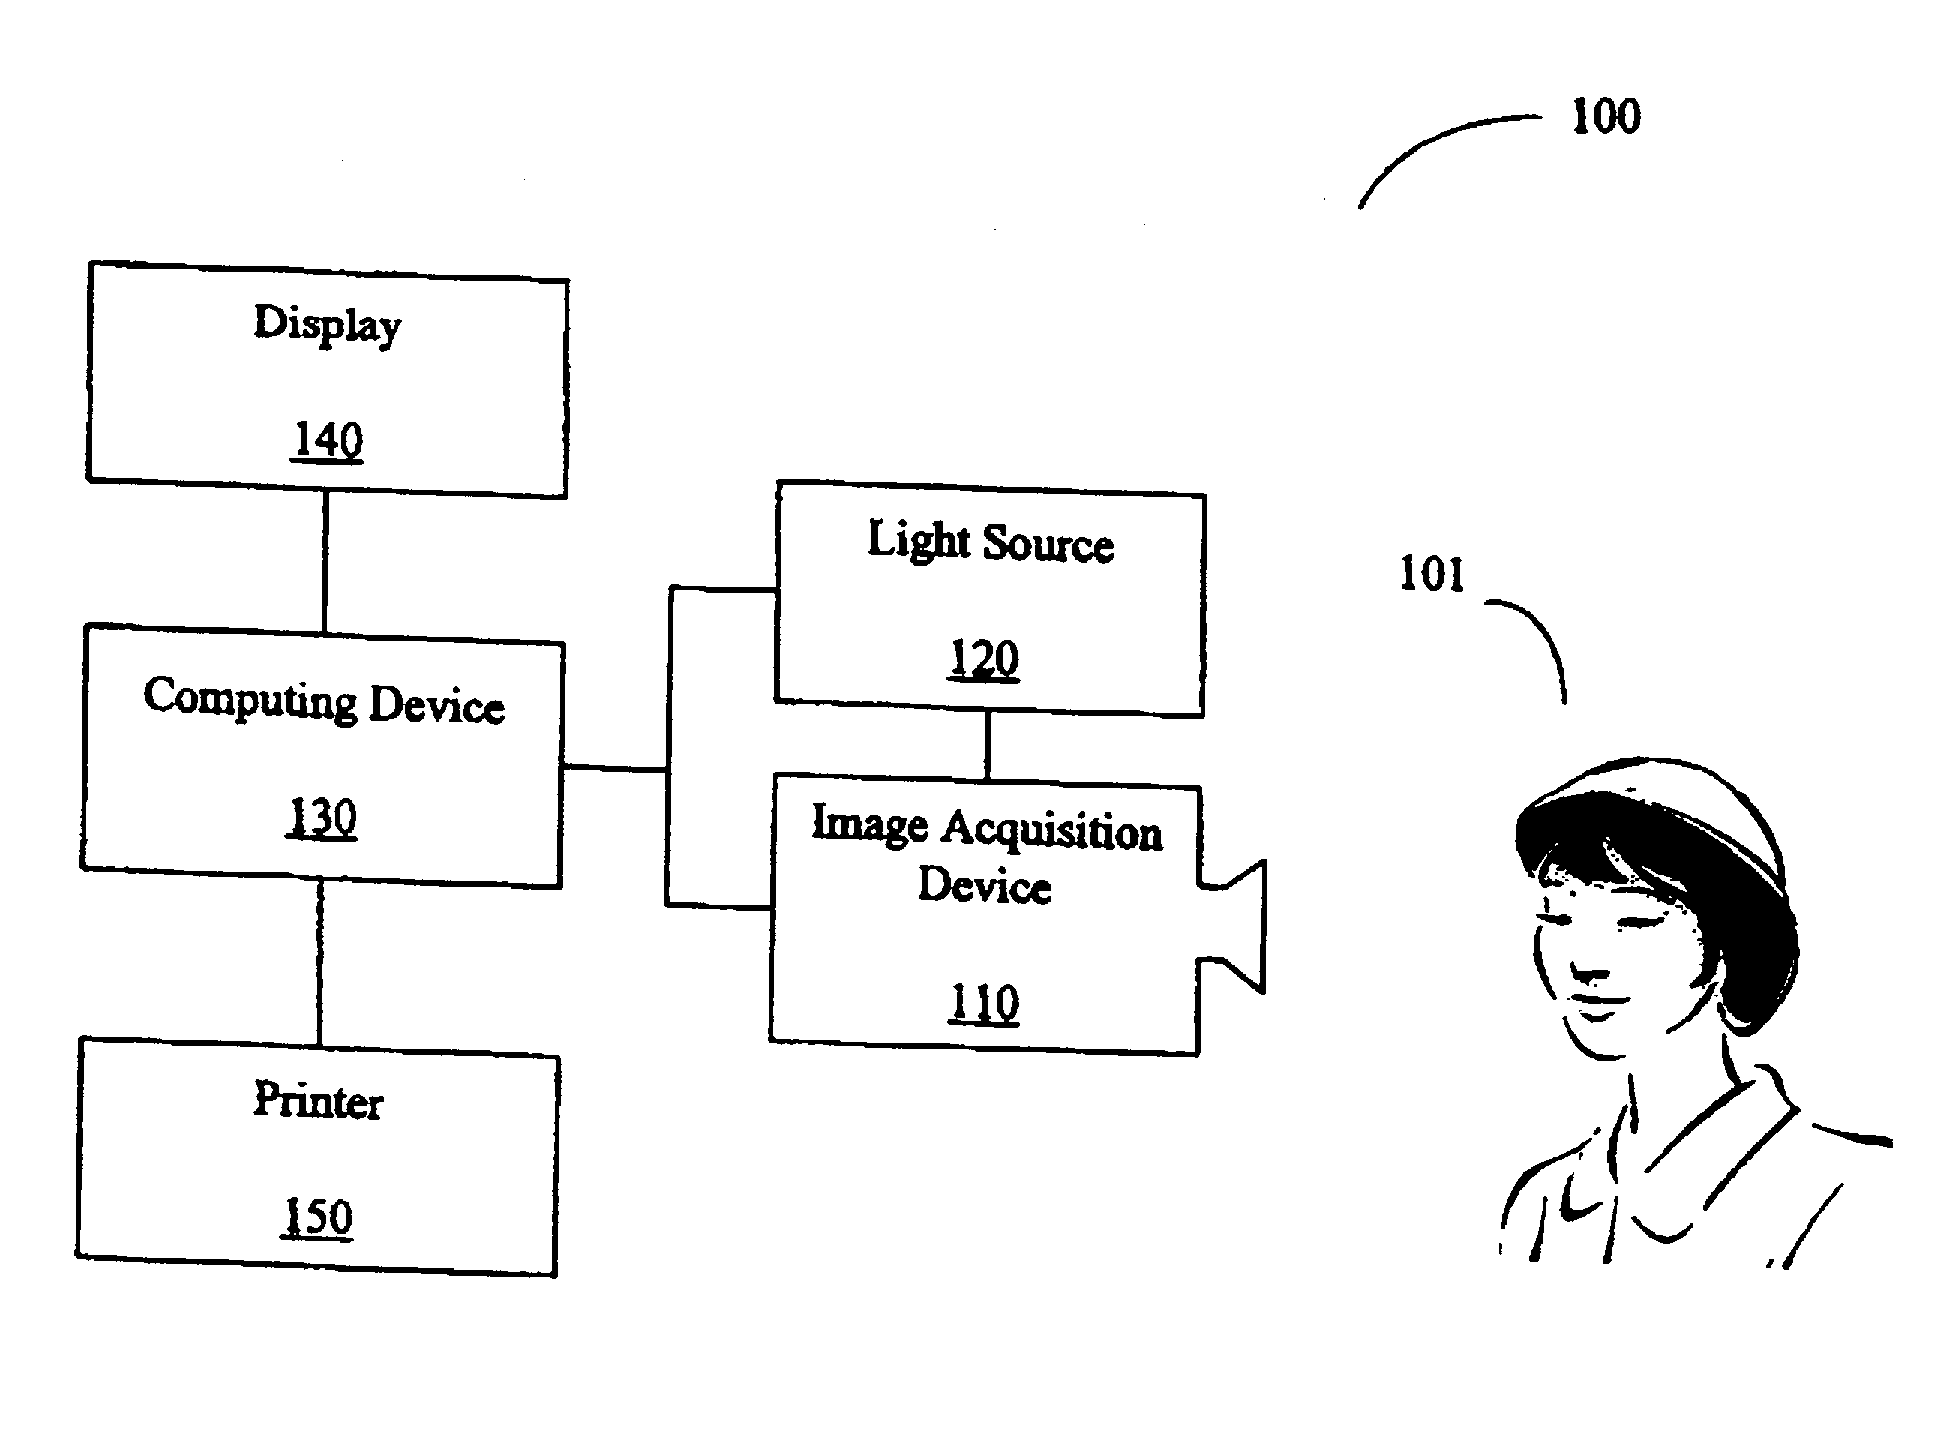 Method and System for Analyzing Physical Conditions Using Digital Images